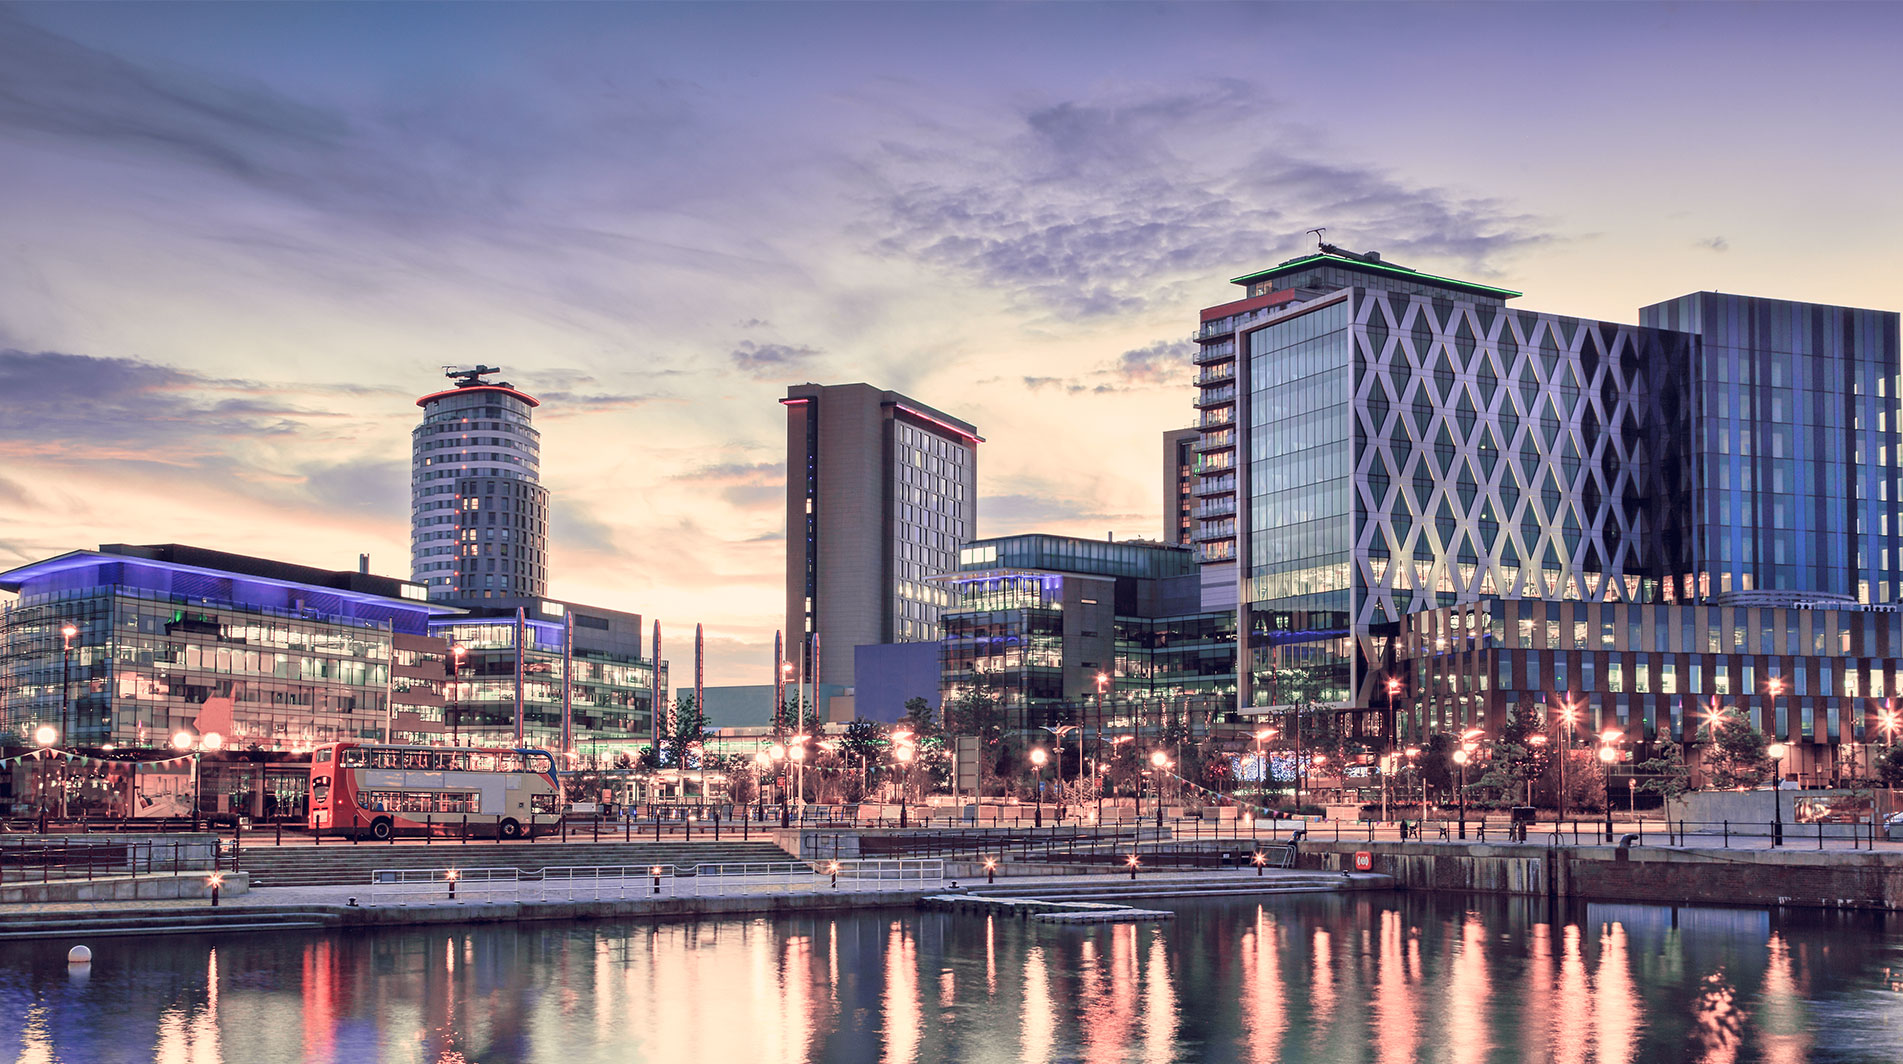 MediaCity as the sun sets in the evening.